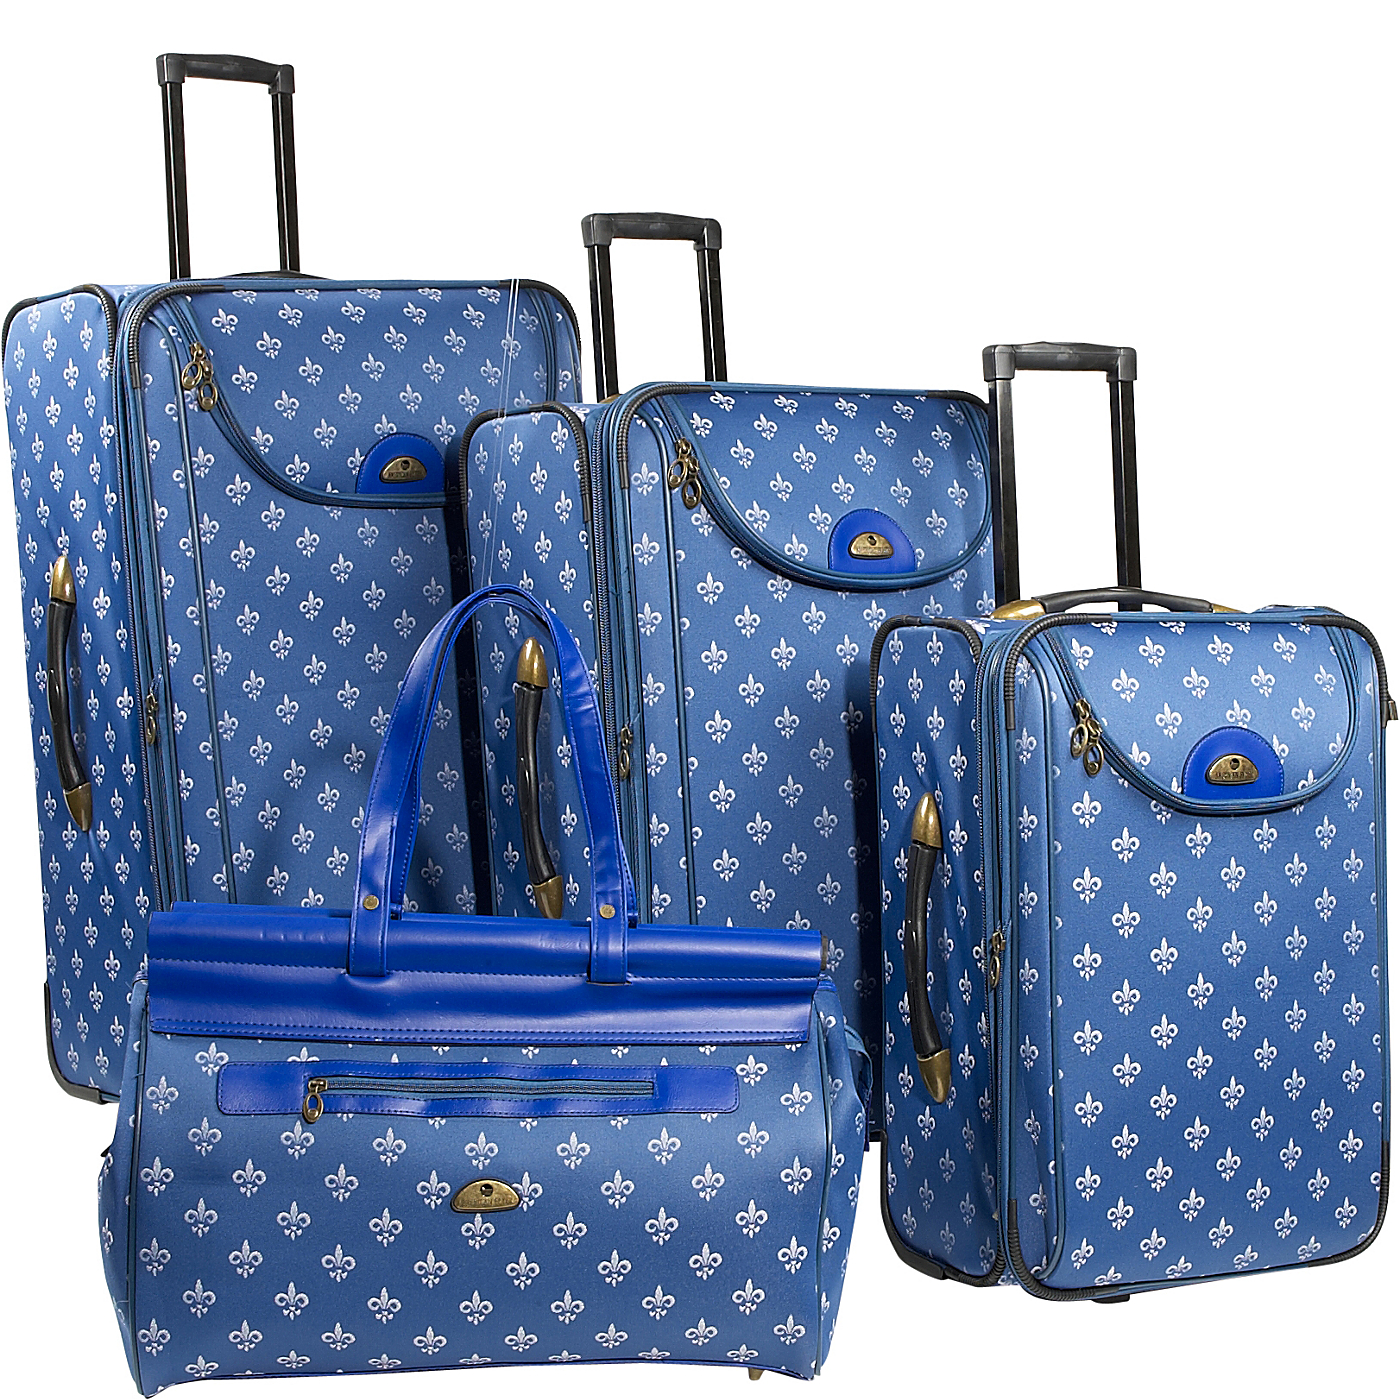 American Flyer Luggage and Bags   